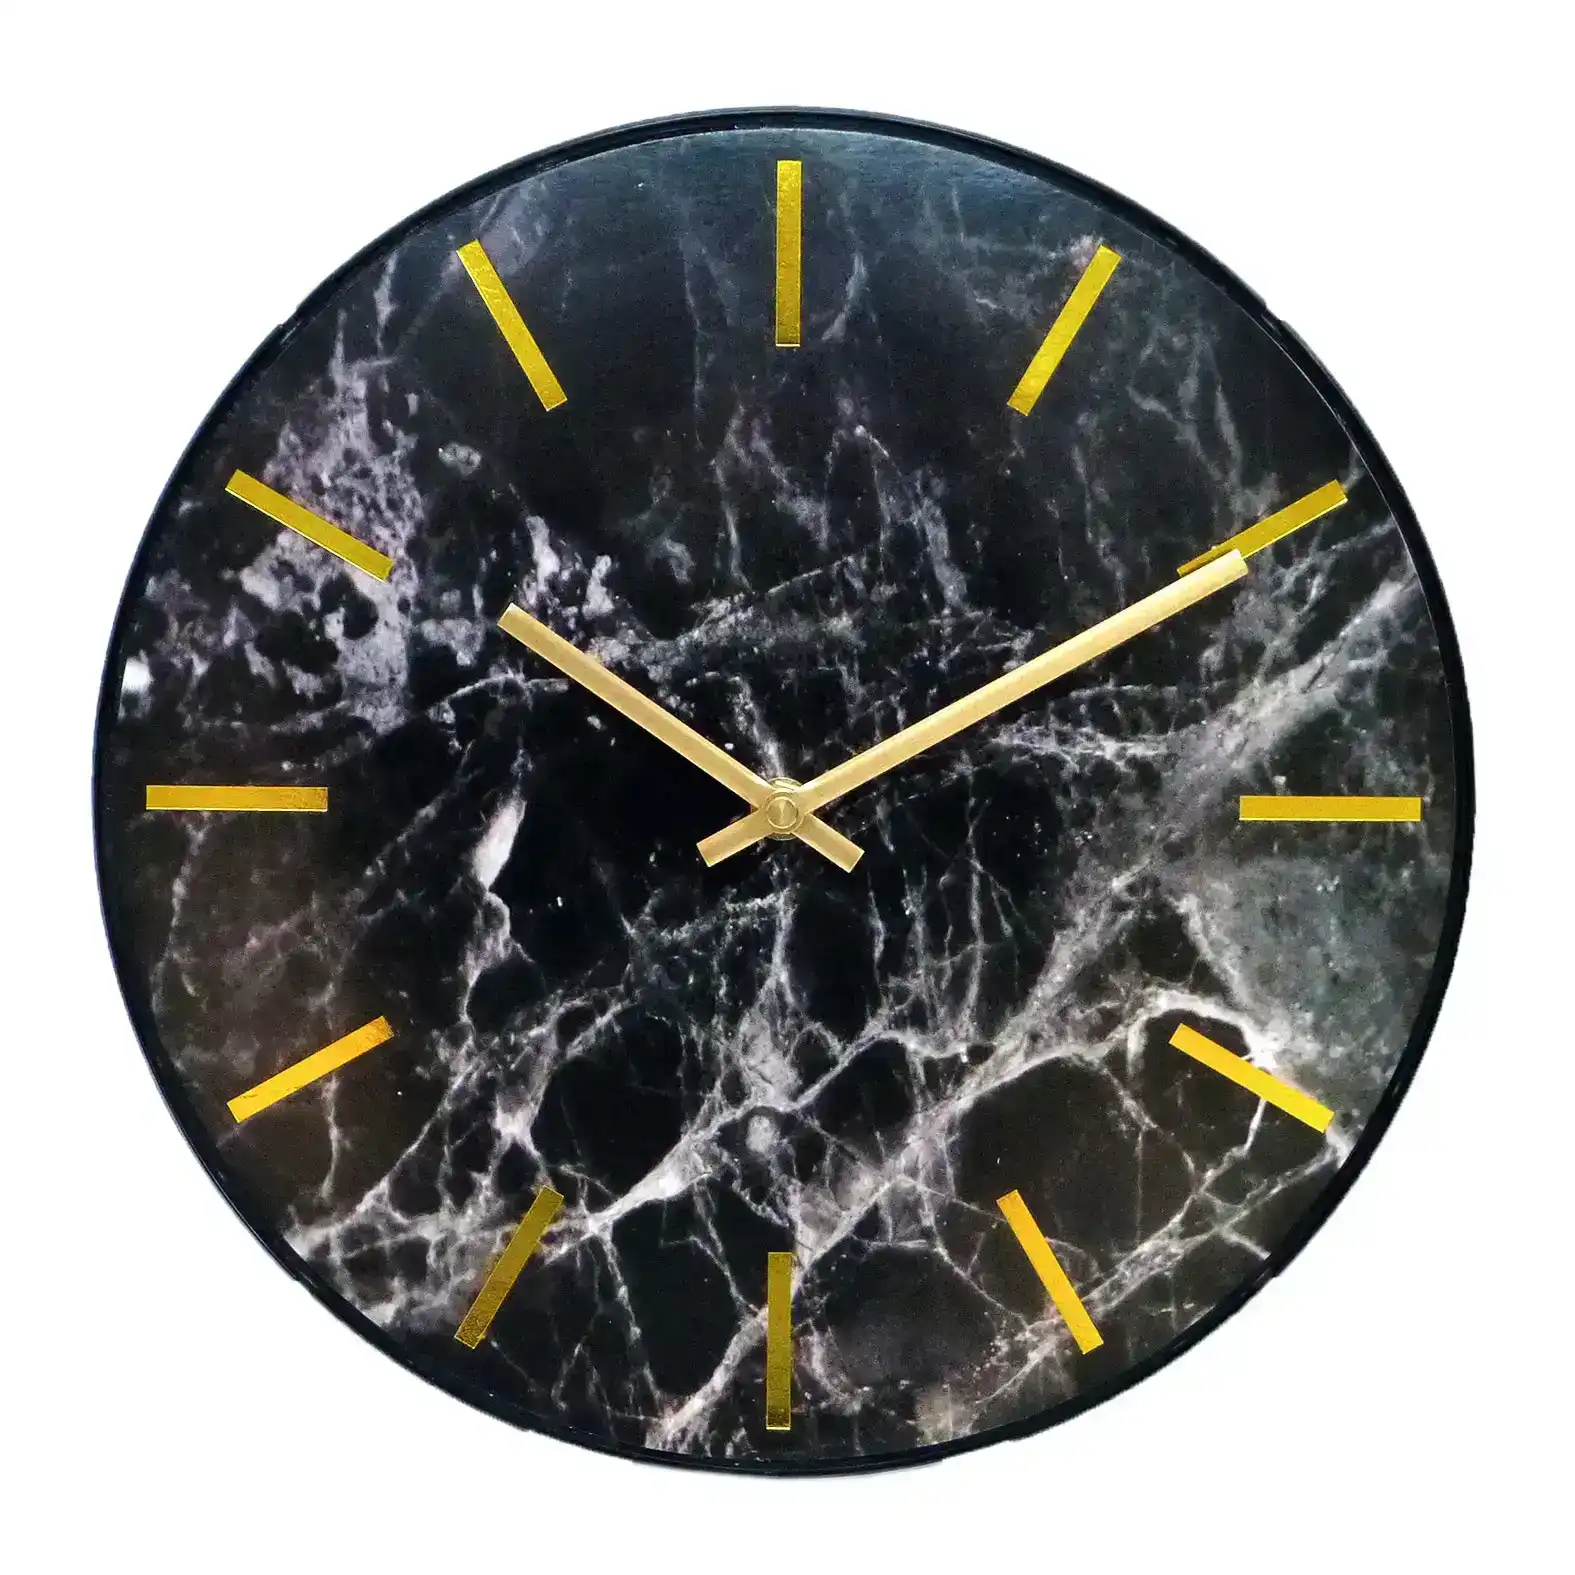 Leni 30cm Marble Look Silent Battery Operated Home/Office Round Wall Clock Black